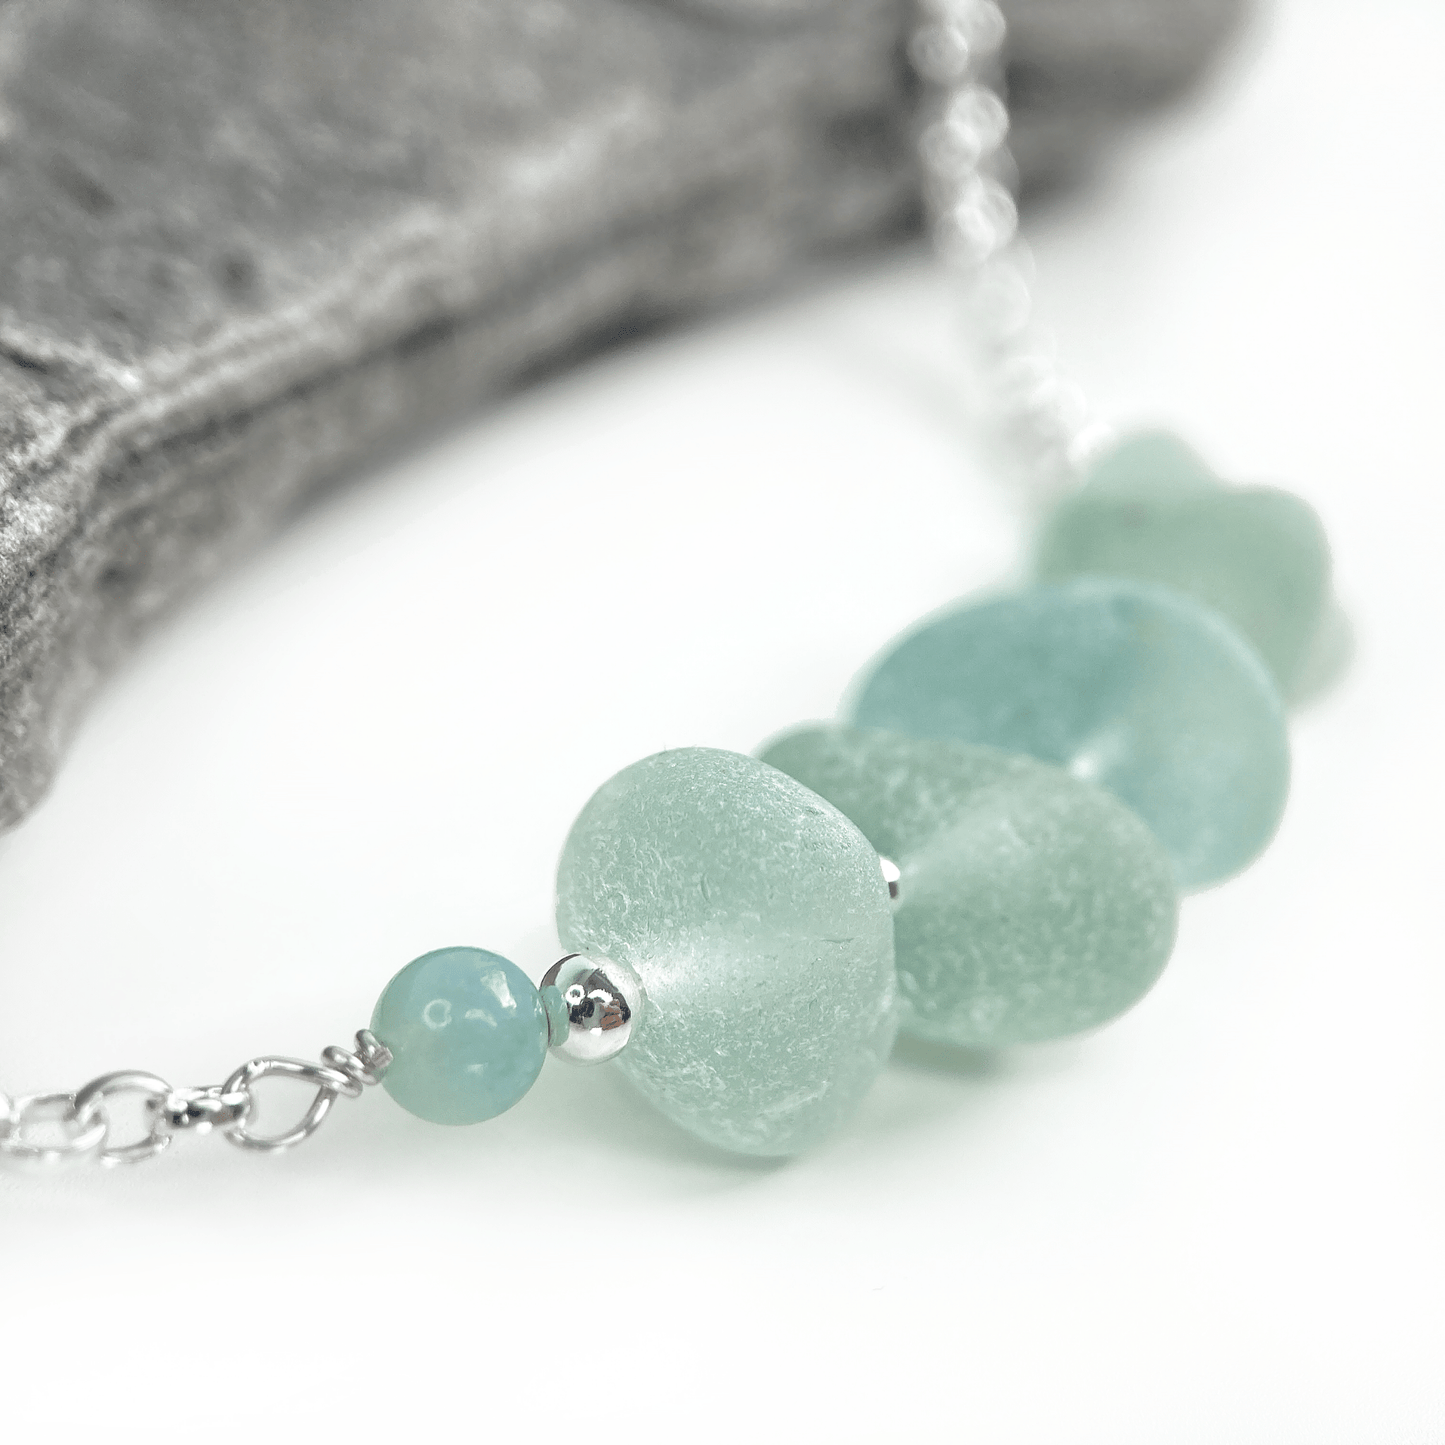 Aqua Green Sea Glass Necklace with Amazonite Crystal Beads - Sterling Silver Scottish Jewellery - East Neuk Beach Crafts